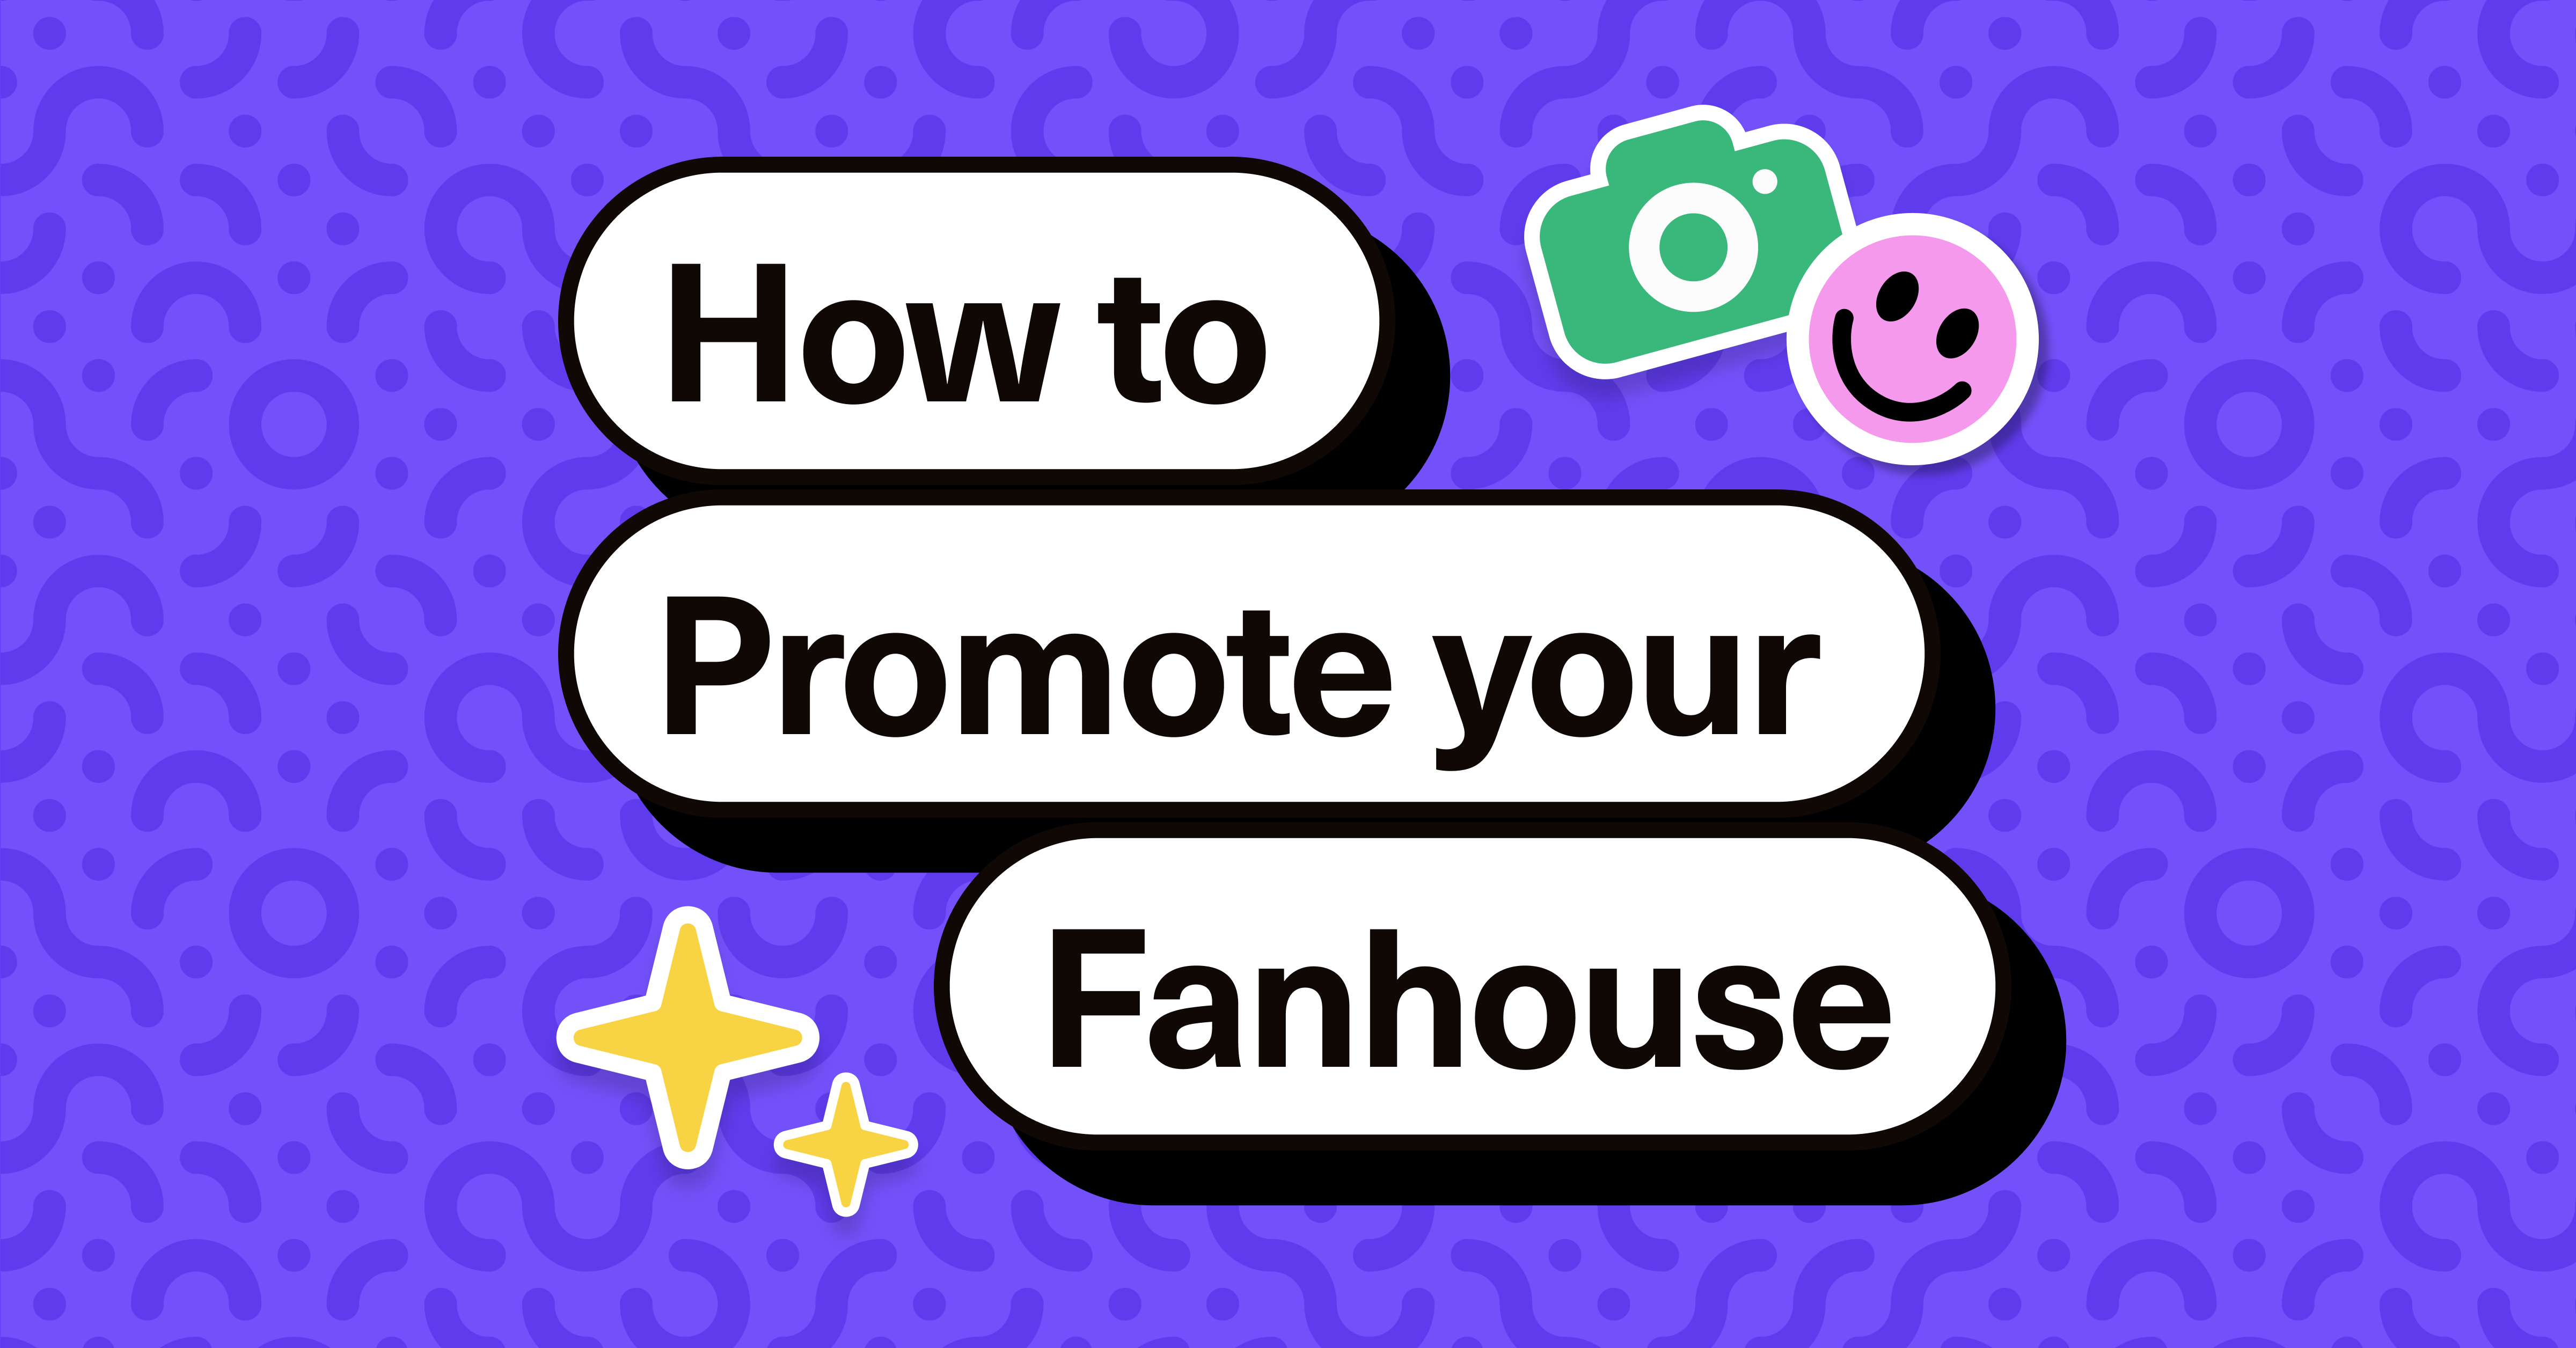 Cover1_Creator_How to promote your Fanhouse_v1.5 (1)